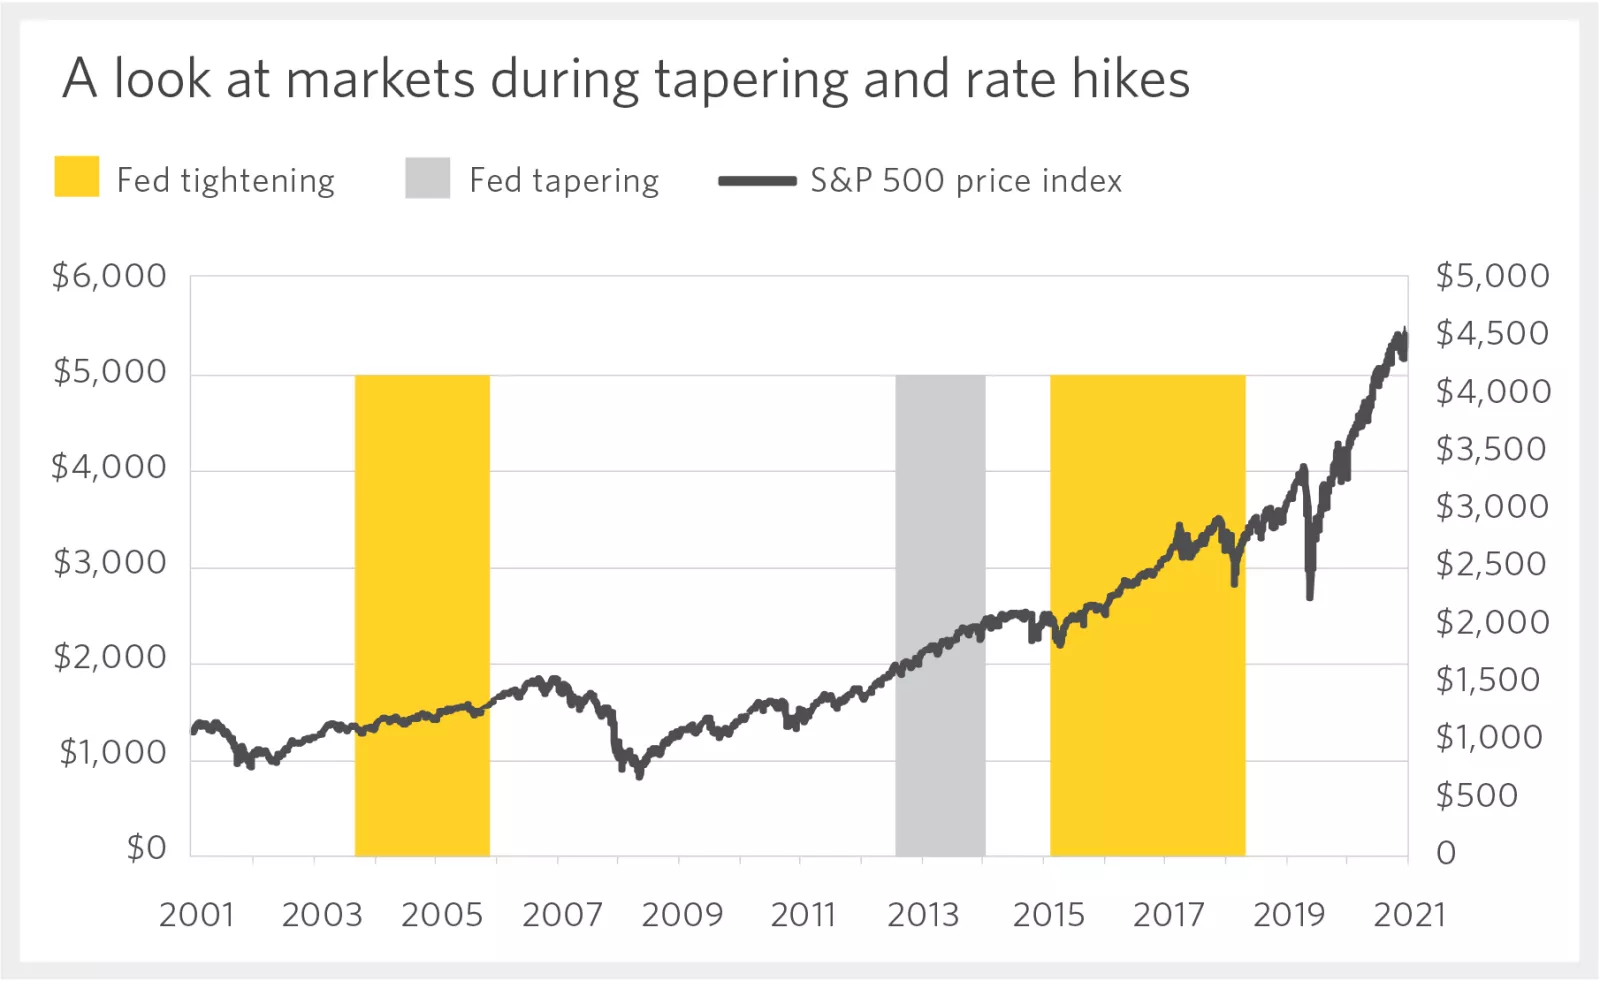  Chart showing markets during tapering and rate hikes from 2001 to 2021.
